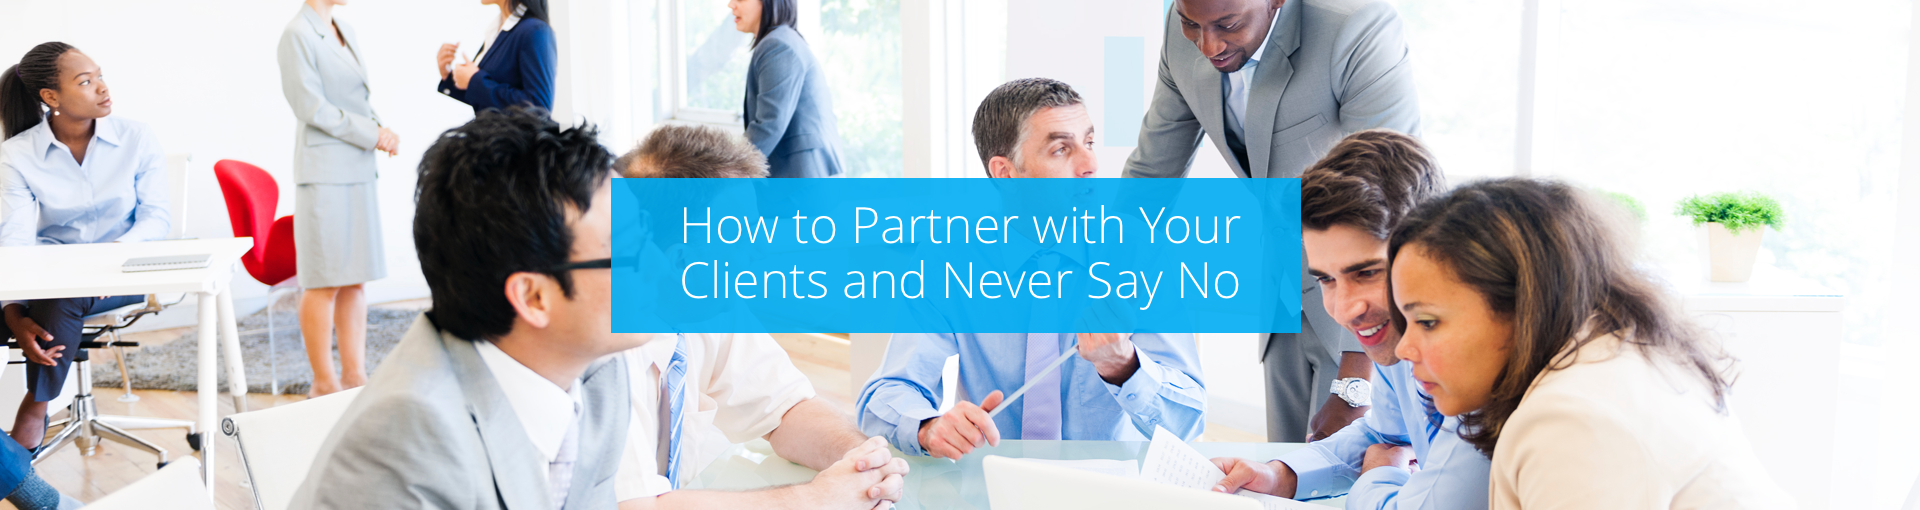 How to Partner with Your Clients and Never Say No Featured Image